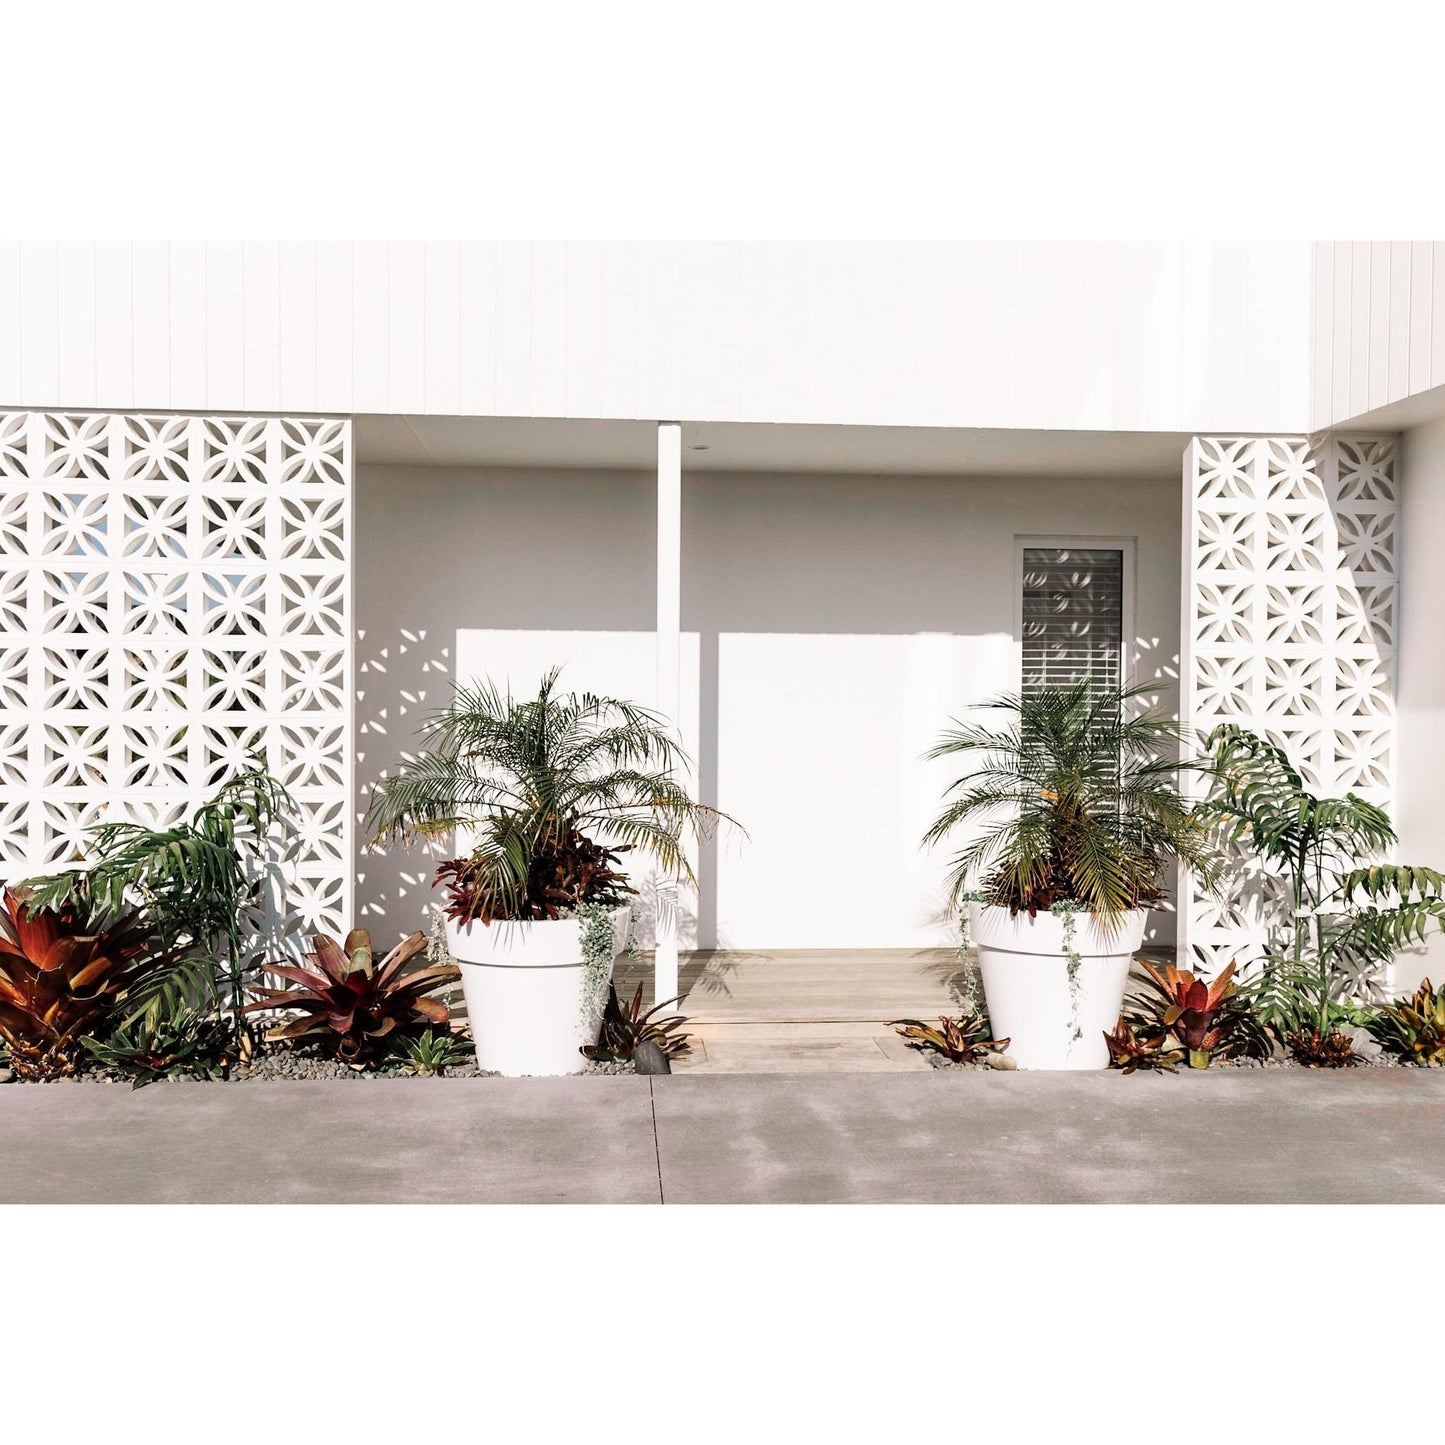 Large white Modscene planter pots in a tropical garden. The planters are planted with a palm tree.